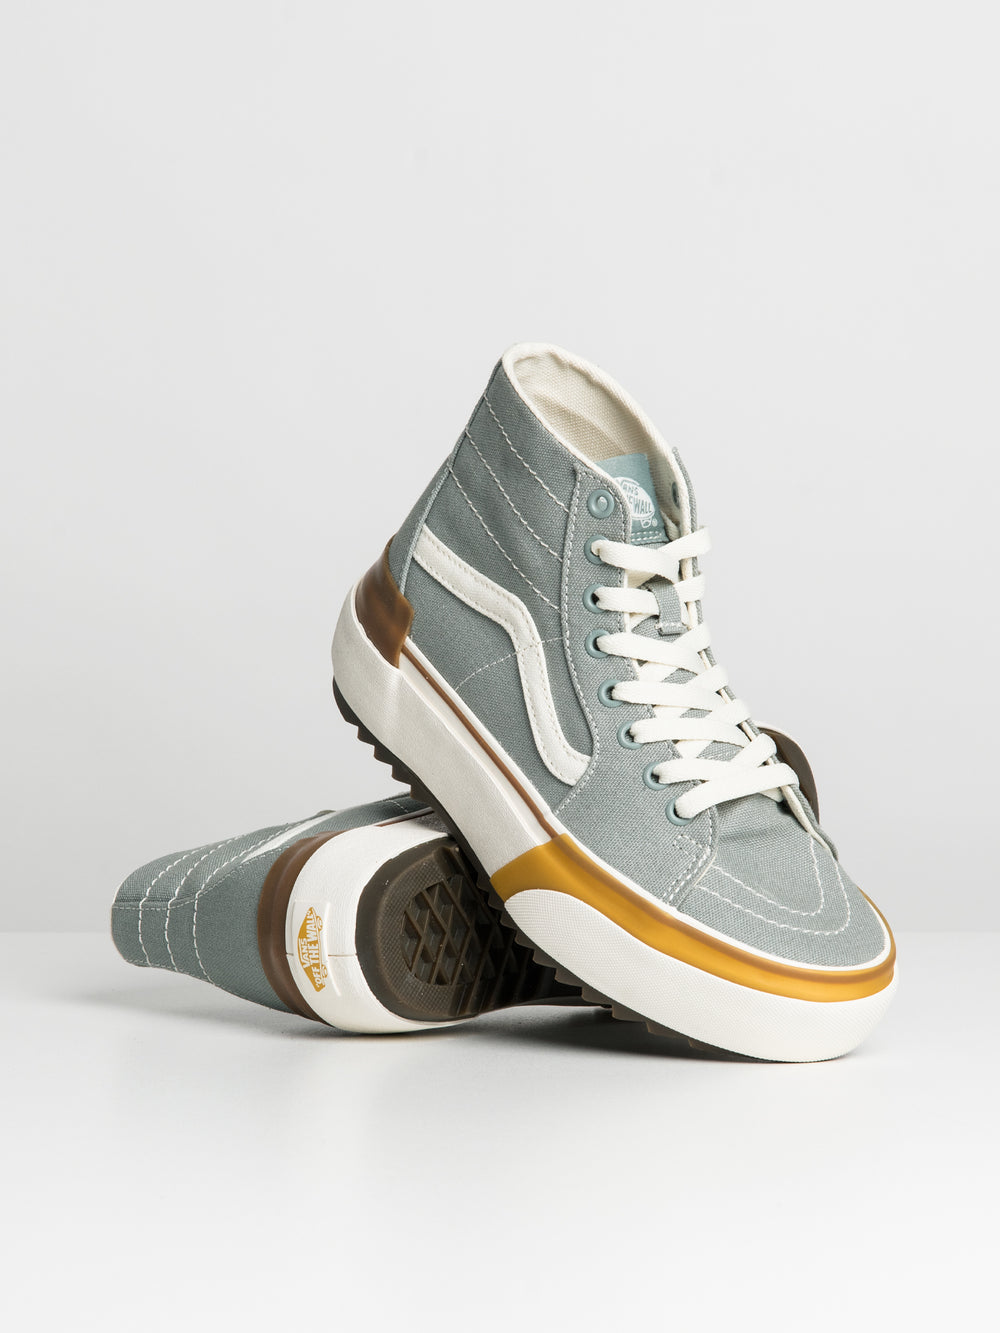 WOMENS VANS SK8 HI TAPERED STACKED CANVAS - CLEARANCE